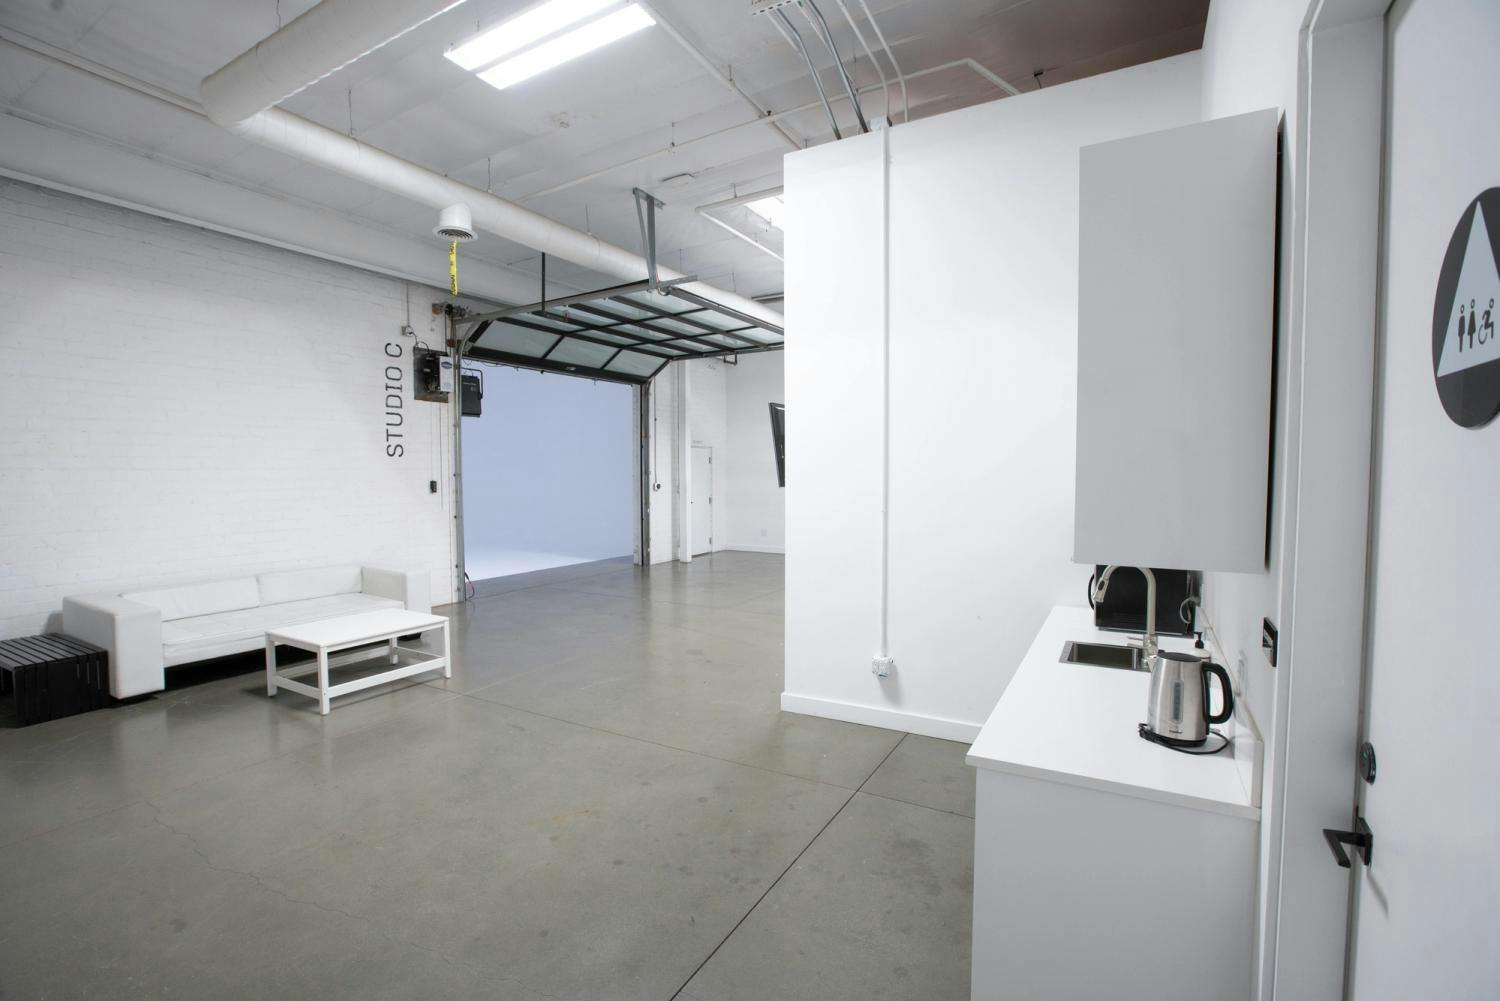 An airy studio break area with minimalist white furniture, a coffee station, and large open space leading to another room, marked by an overhead "STUDIO C" sign.